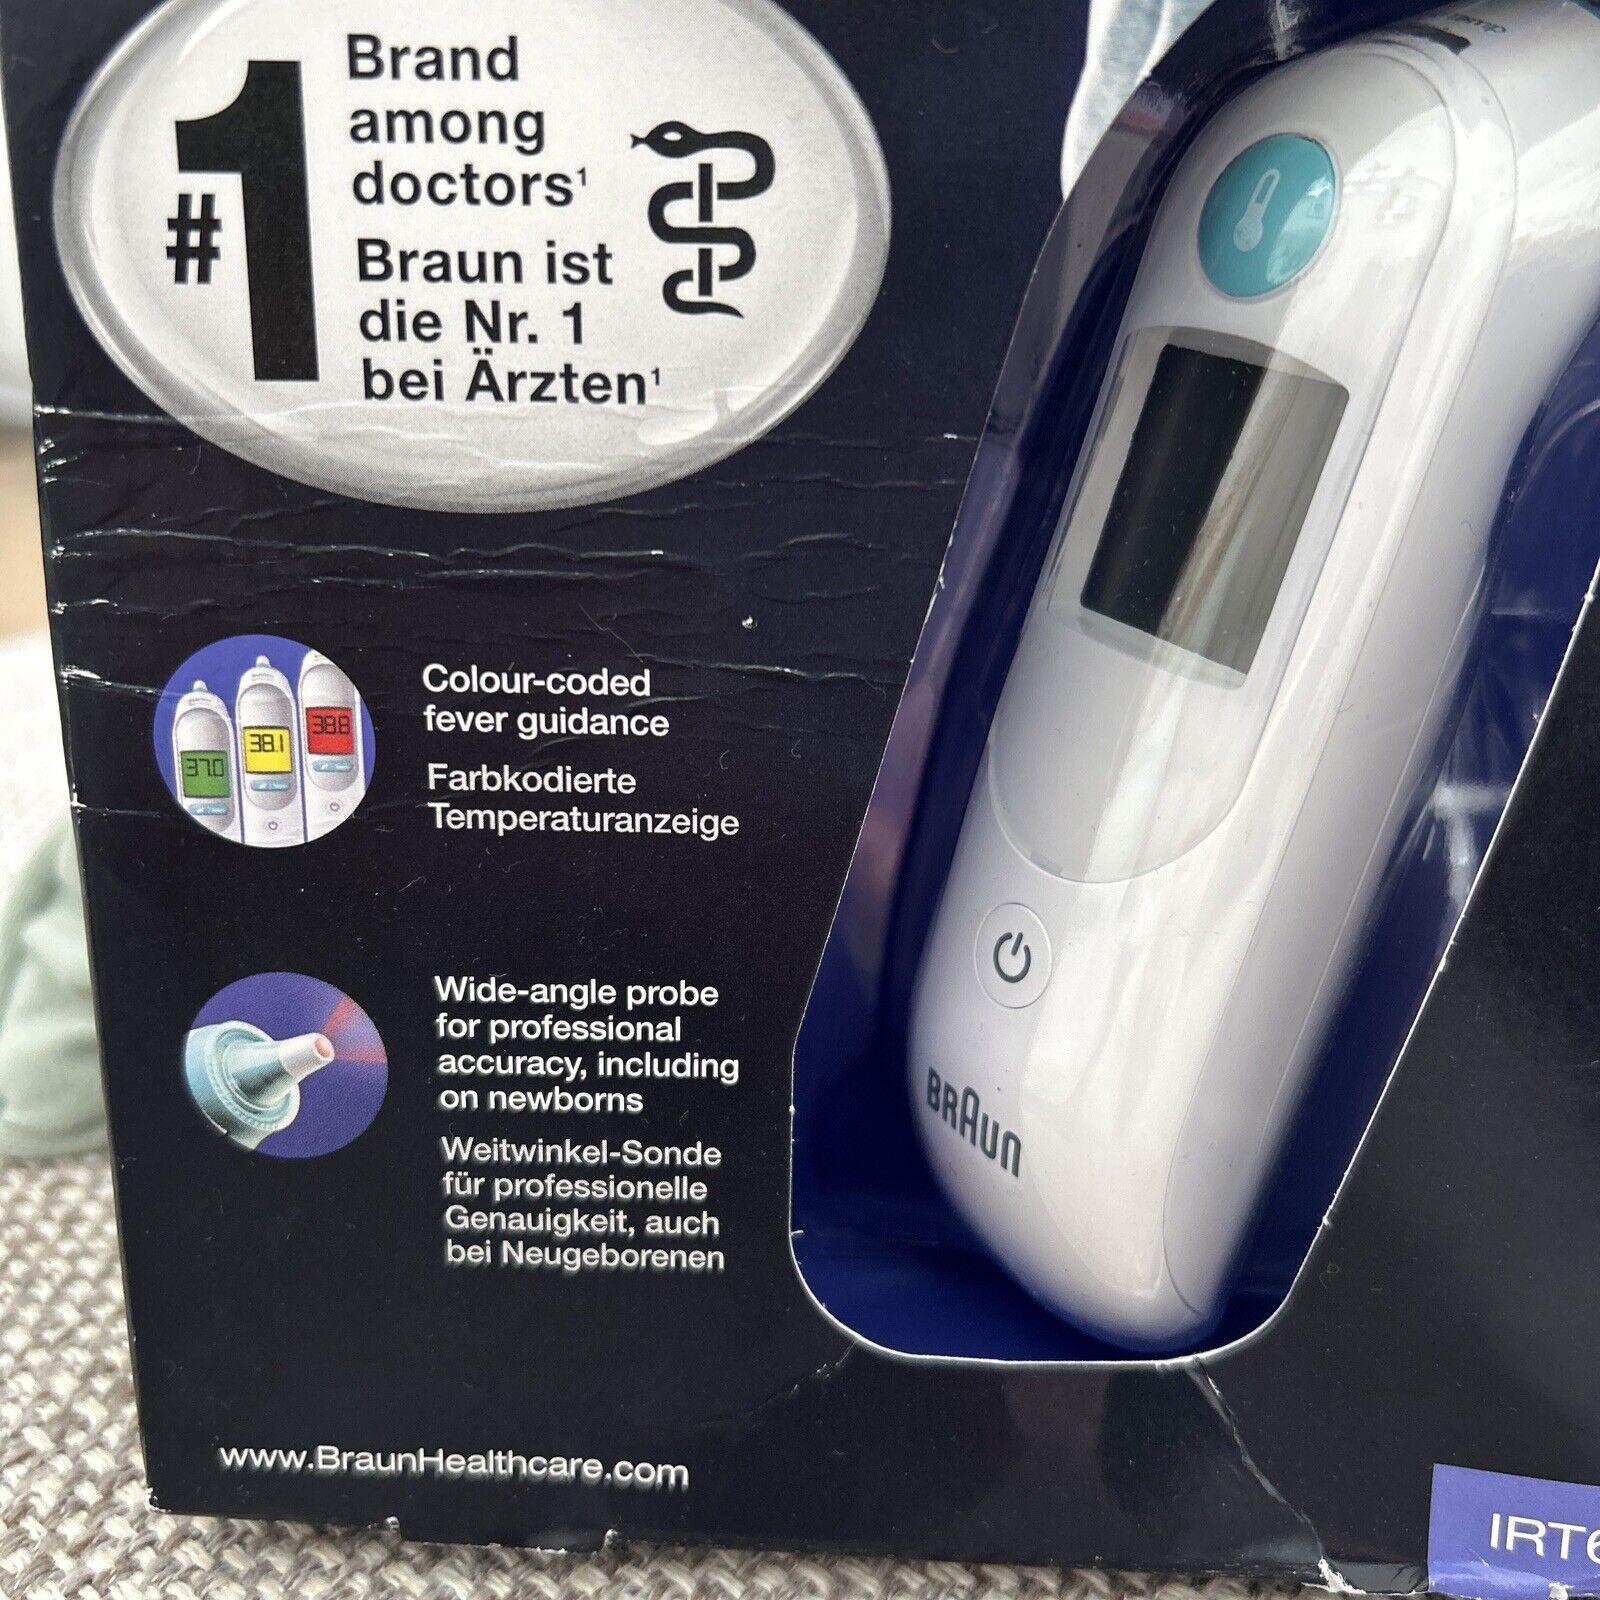 Braun Infrared Ear Thermometer & Case